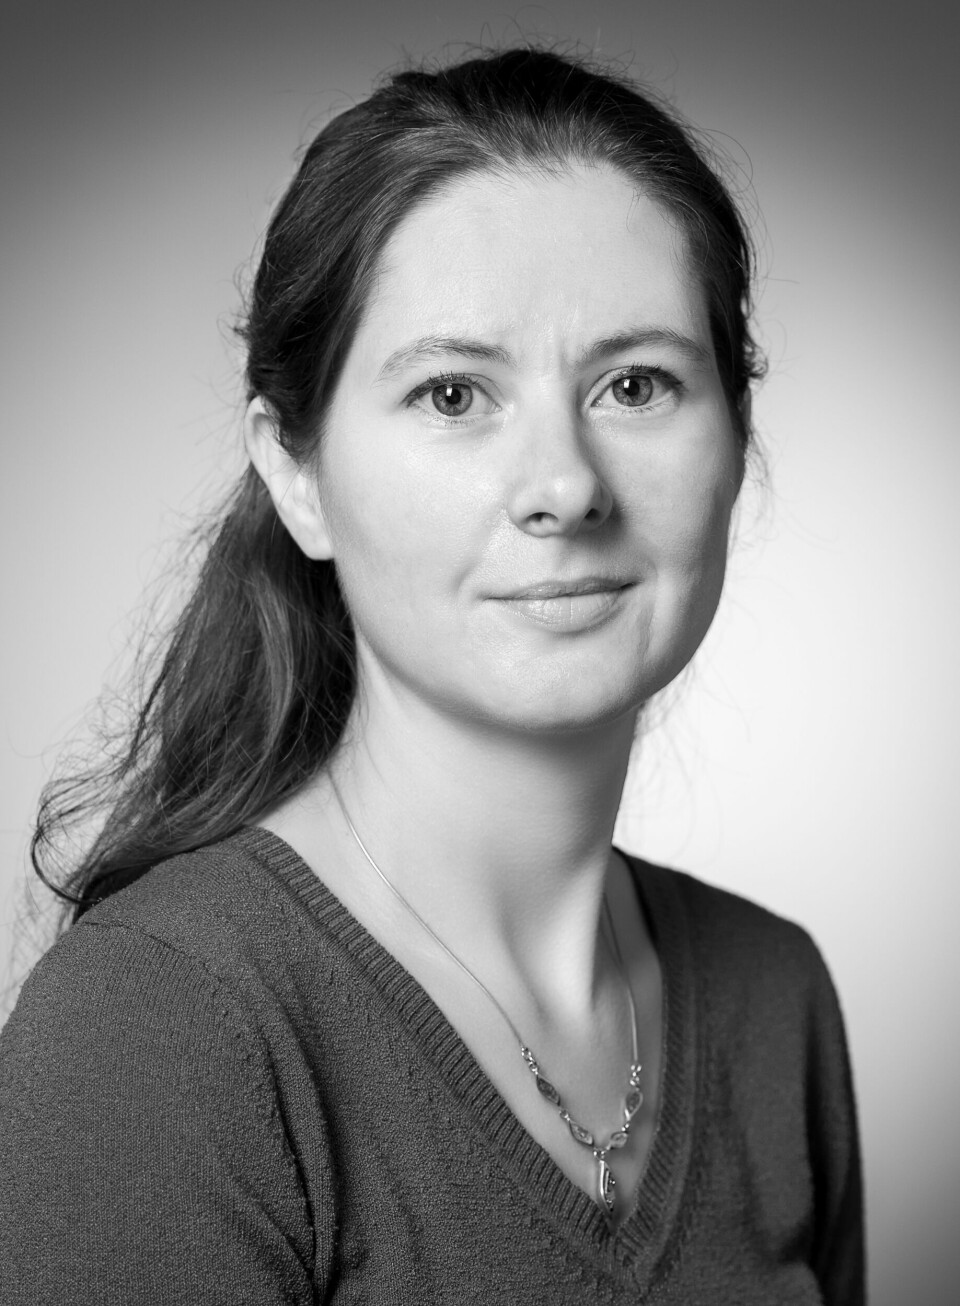 Gunnveig Grødeland is a vaccine researcher at the University of Oslo and Oslo University Hospital.